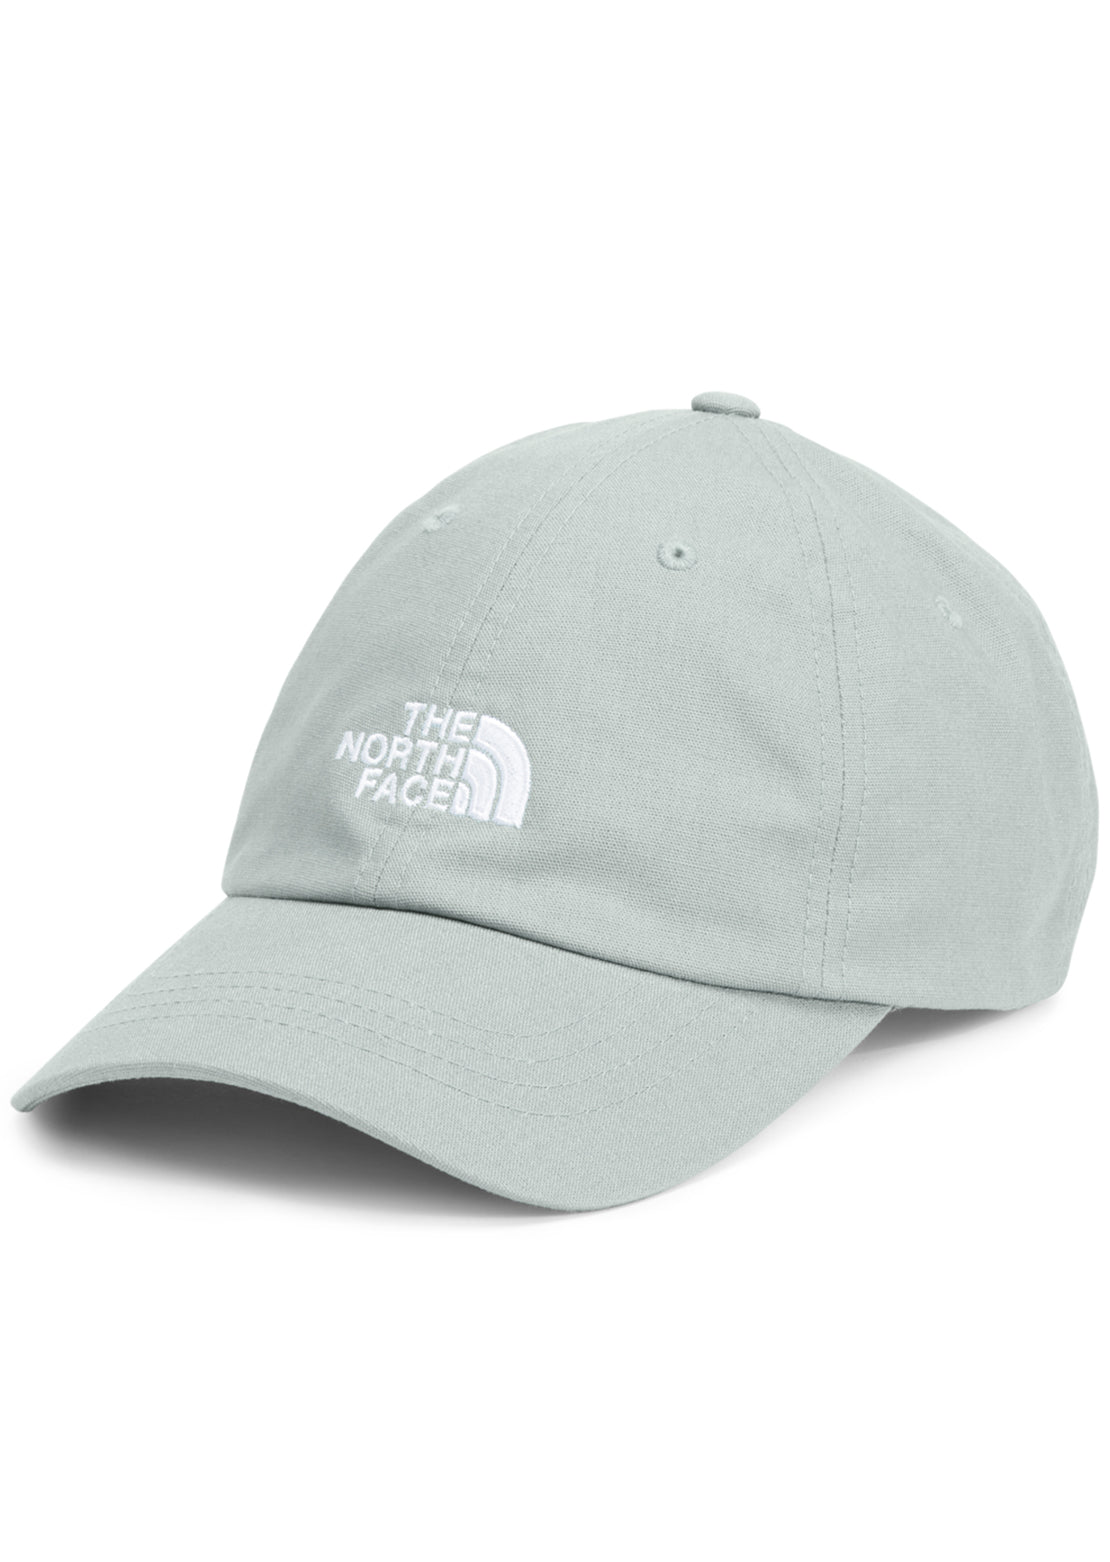 The North Face Norm Cap Wrought Iron